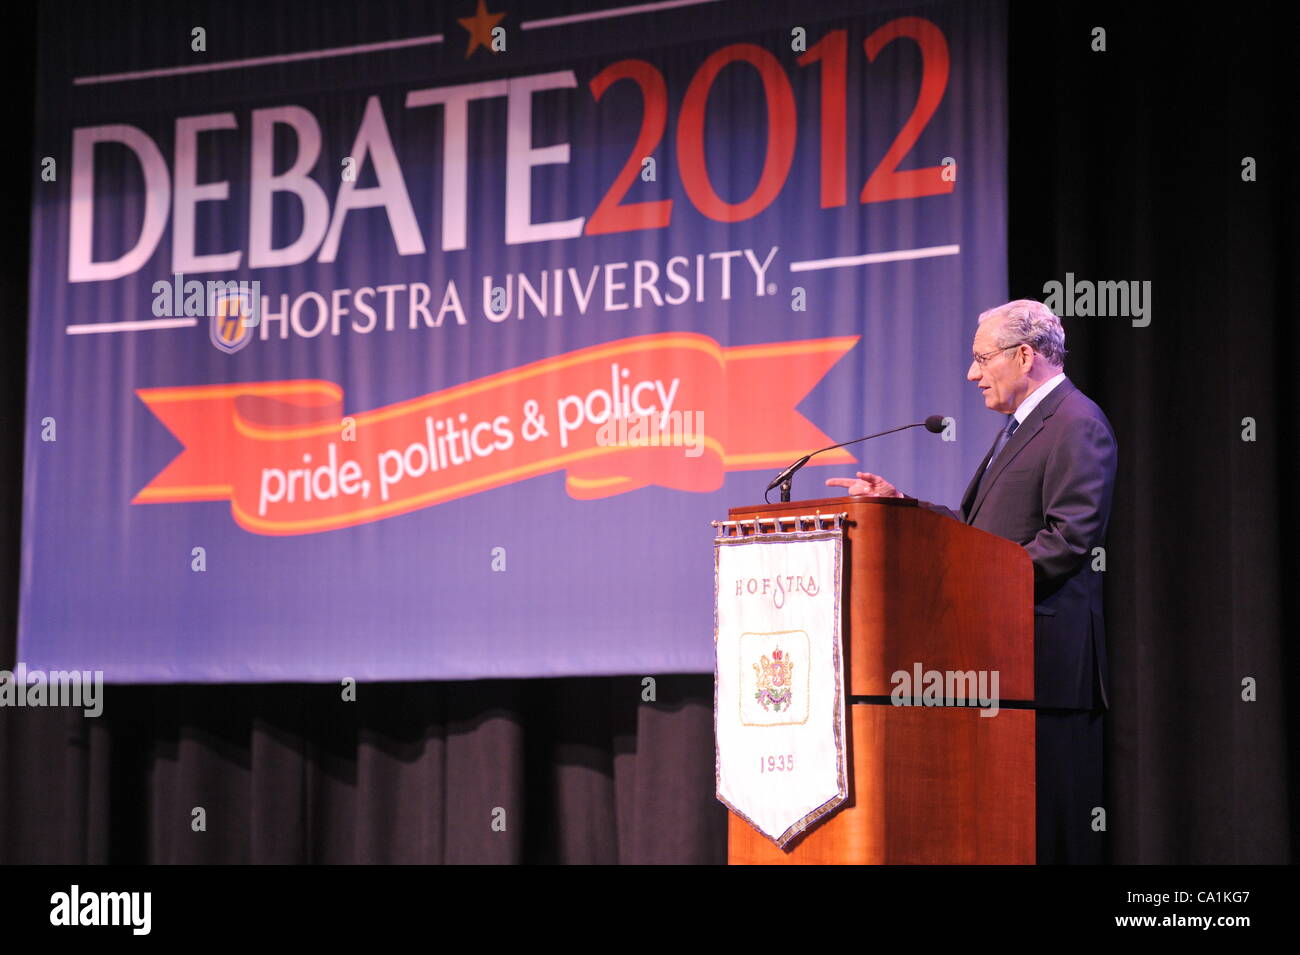 Journalists Bob Woodward (shown at podium) and Carl Bernstein speaking on 40th Anniversary of Watergate, on Tuesday, March 20, 2012, at Hofstra University, Hempstead, New York, USA. This lecture was about the Watergate political scandal, which lead to resignation of President Richard Nixon, and is o Stock Photo